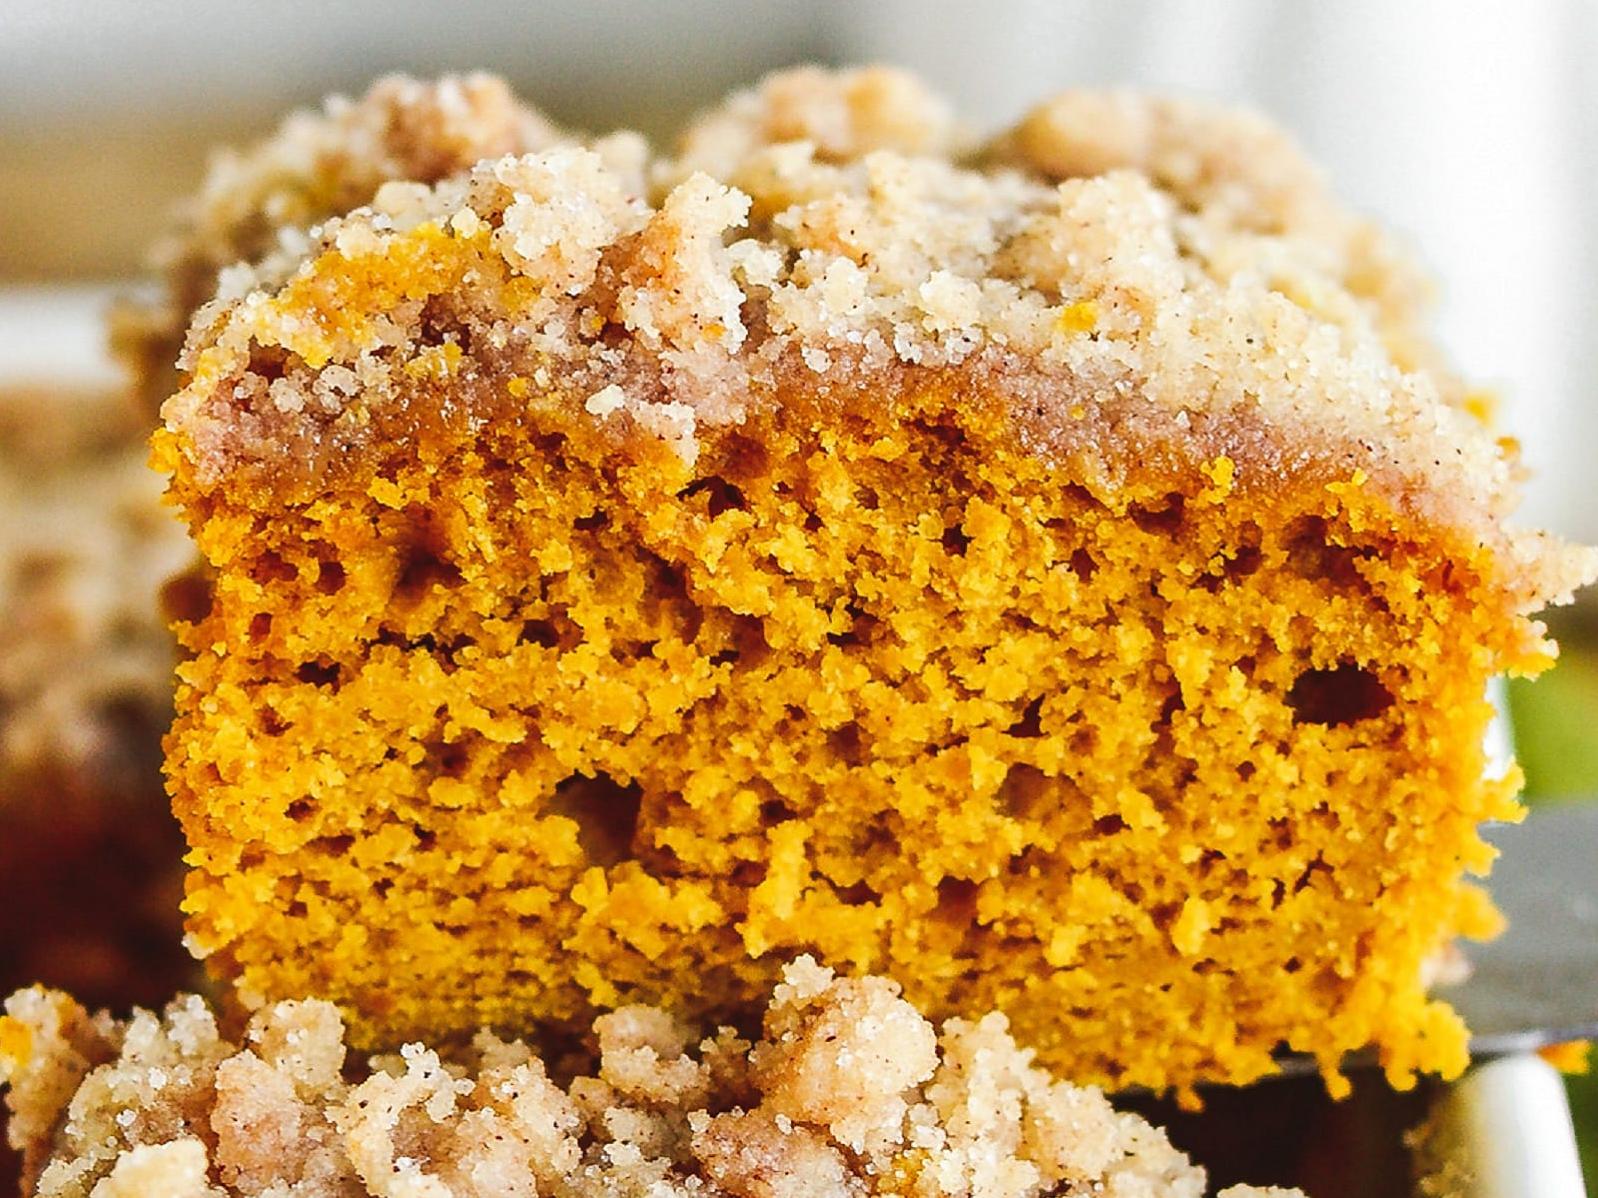  Get ready to fall in love with this seasonal twist on classic coffee cake.